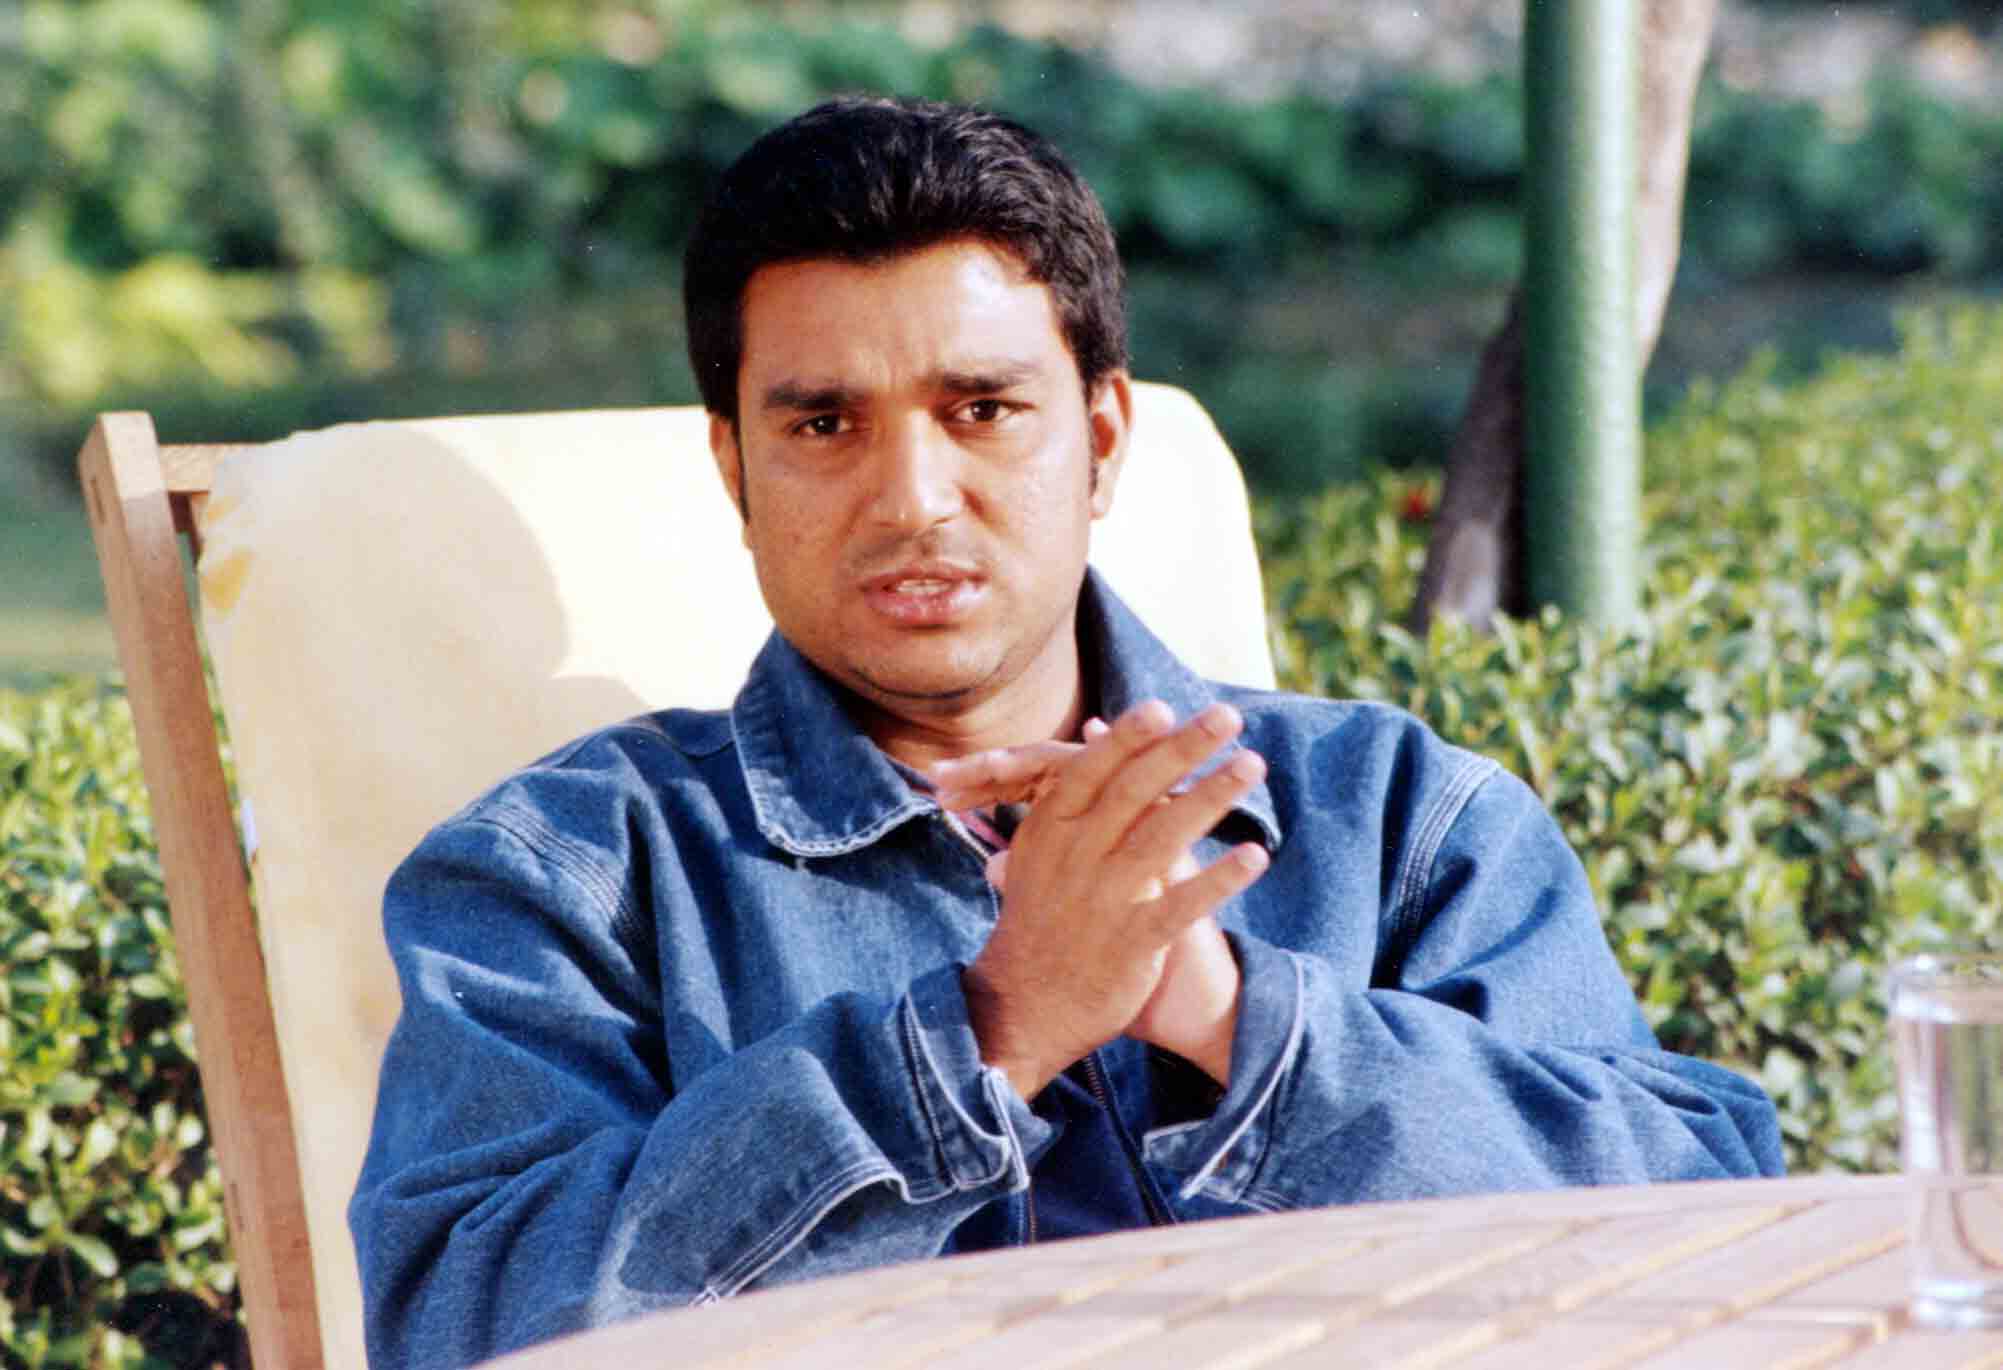 Perhaps more well-known for his commentary stint than his cricketing career, Sanjay Manjrekar has been seen in the commentary box for most of India's international tournaments in the past two decades.